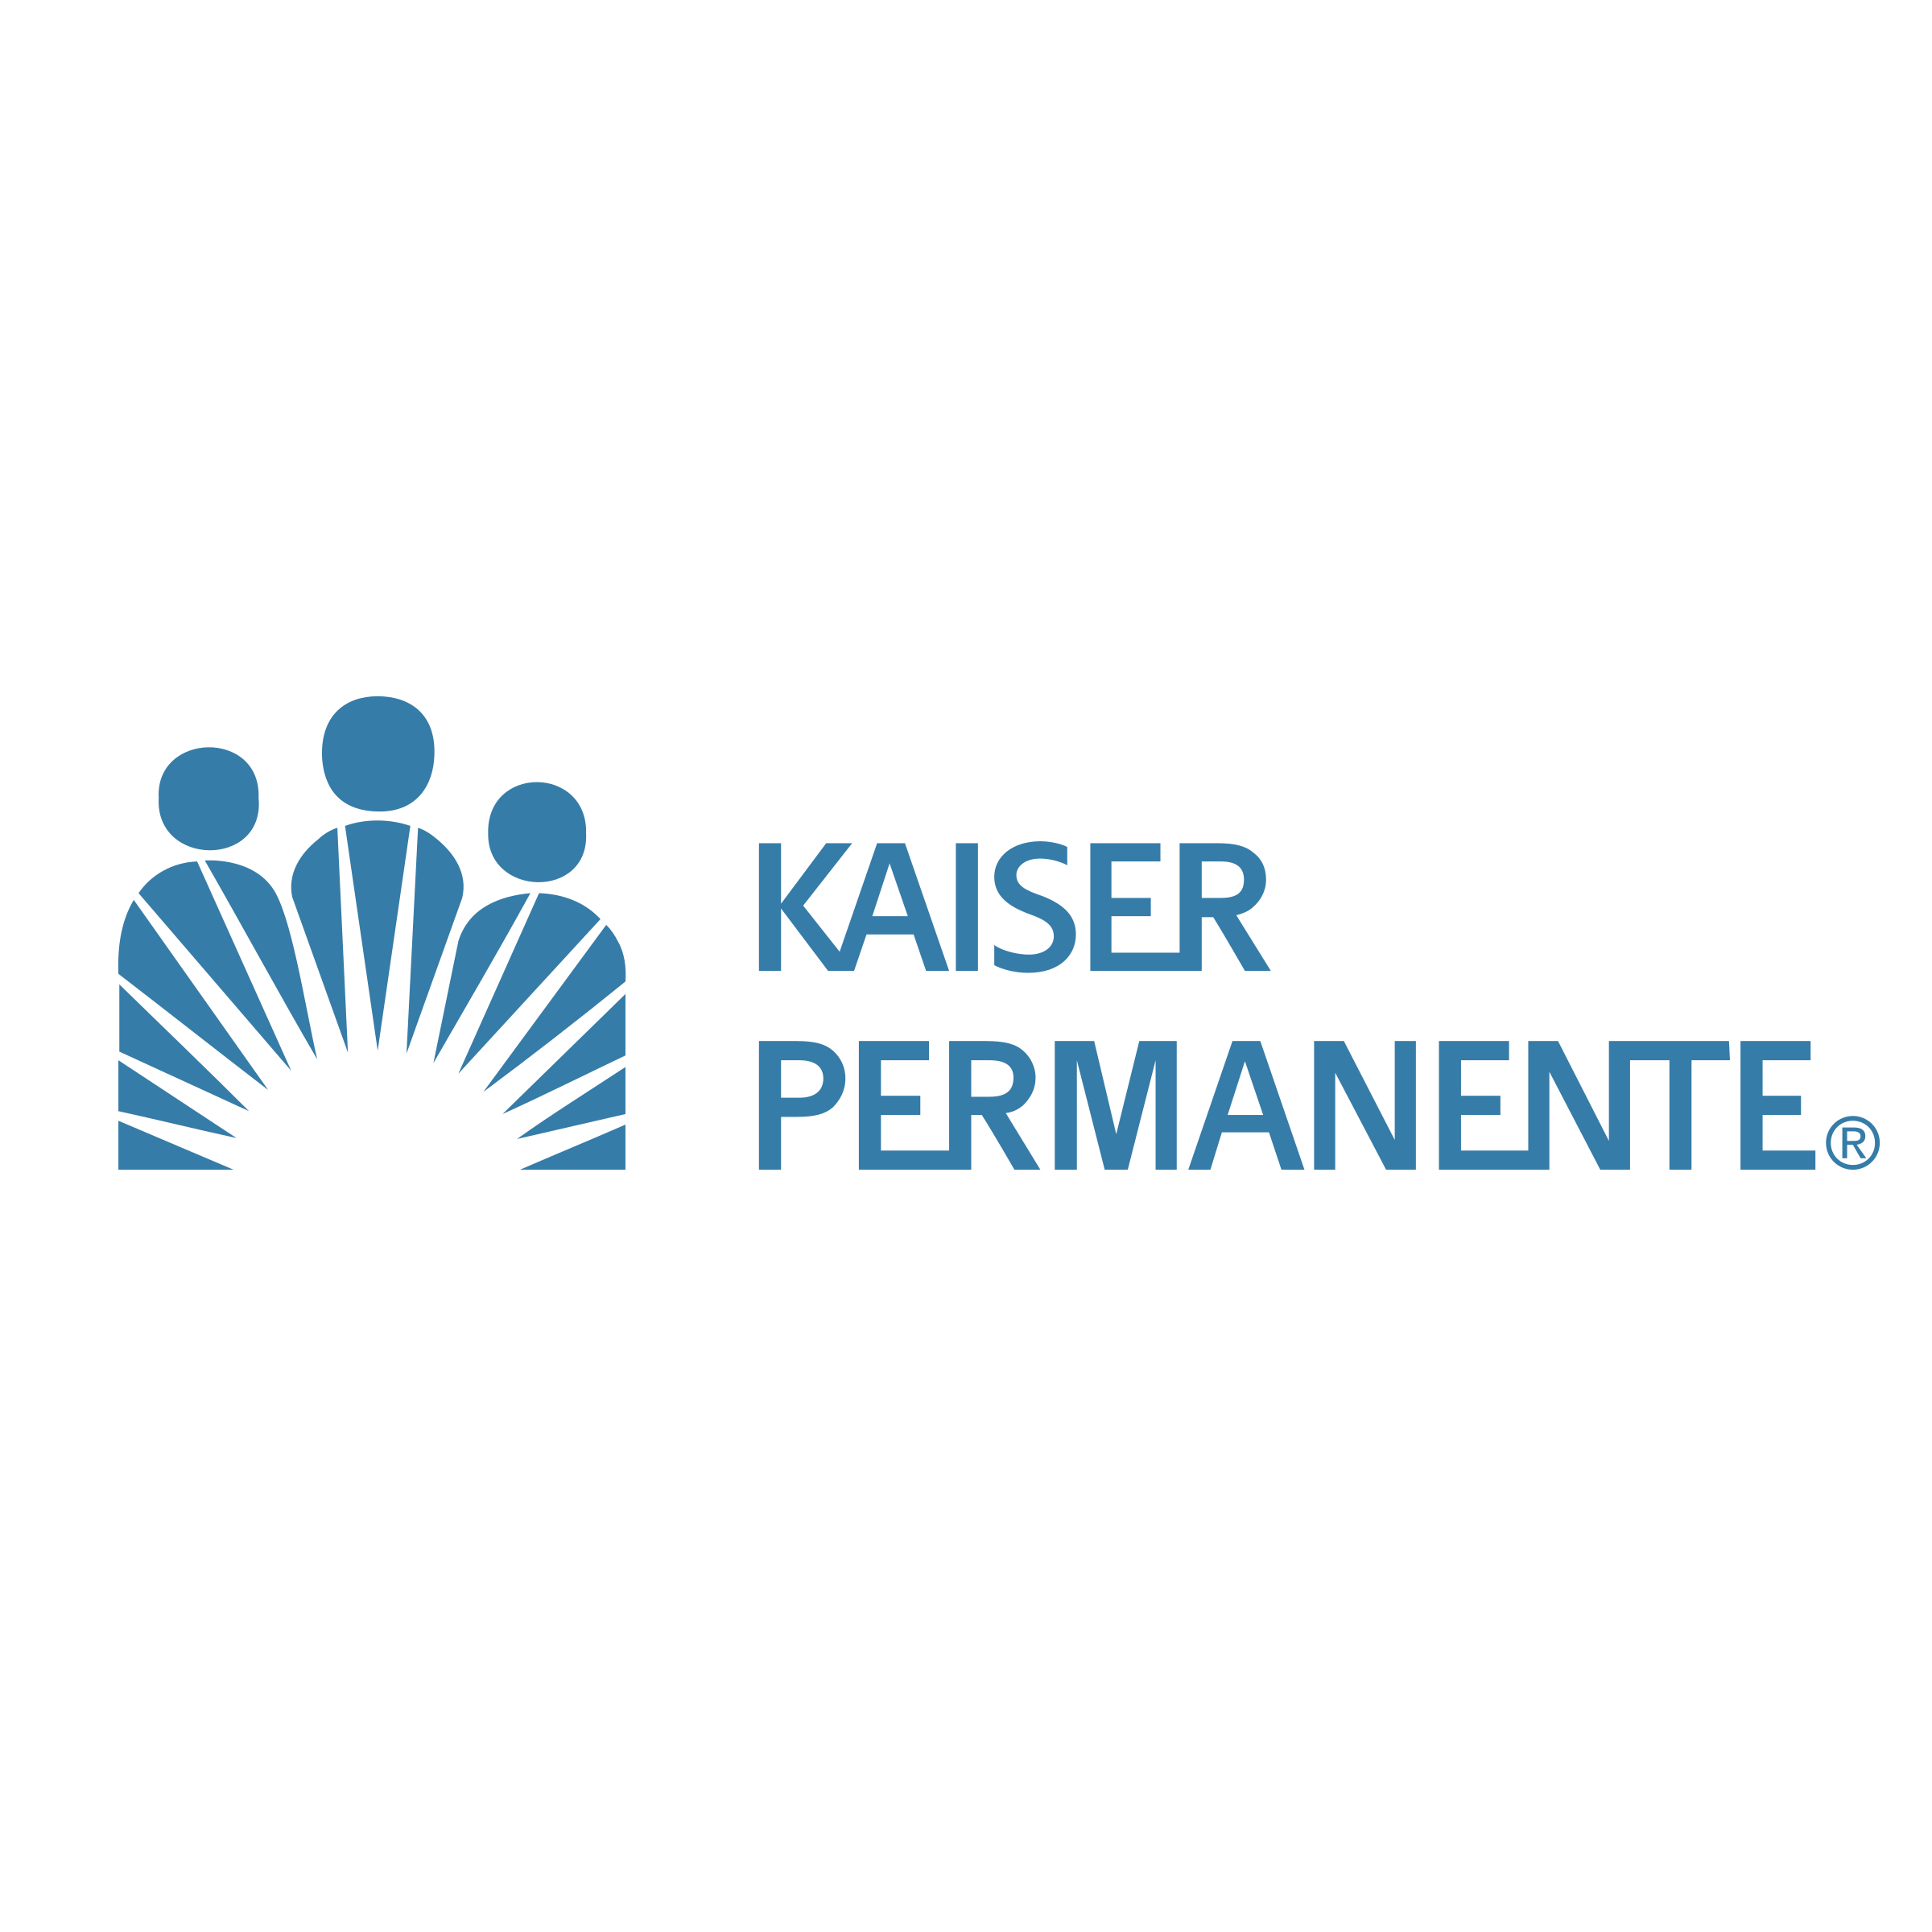 insurance plans in association with kaiser permanente